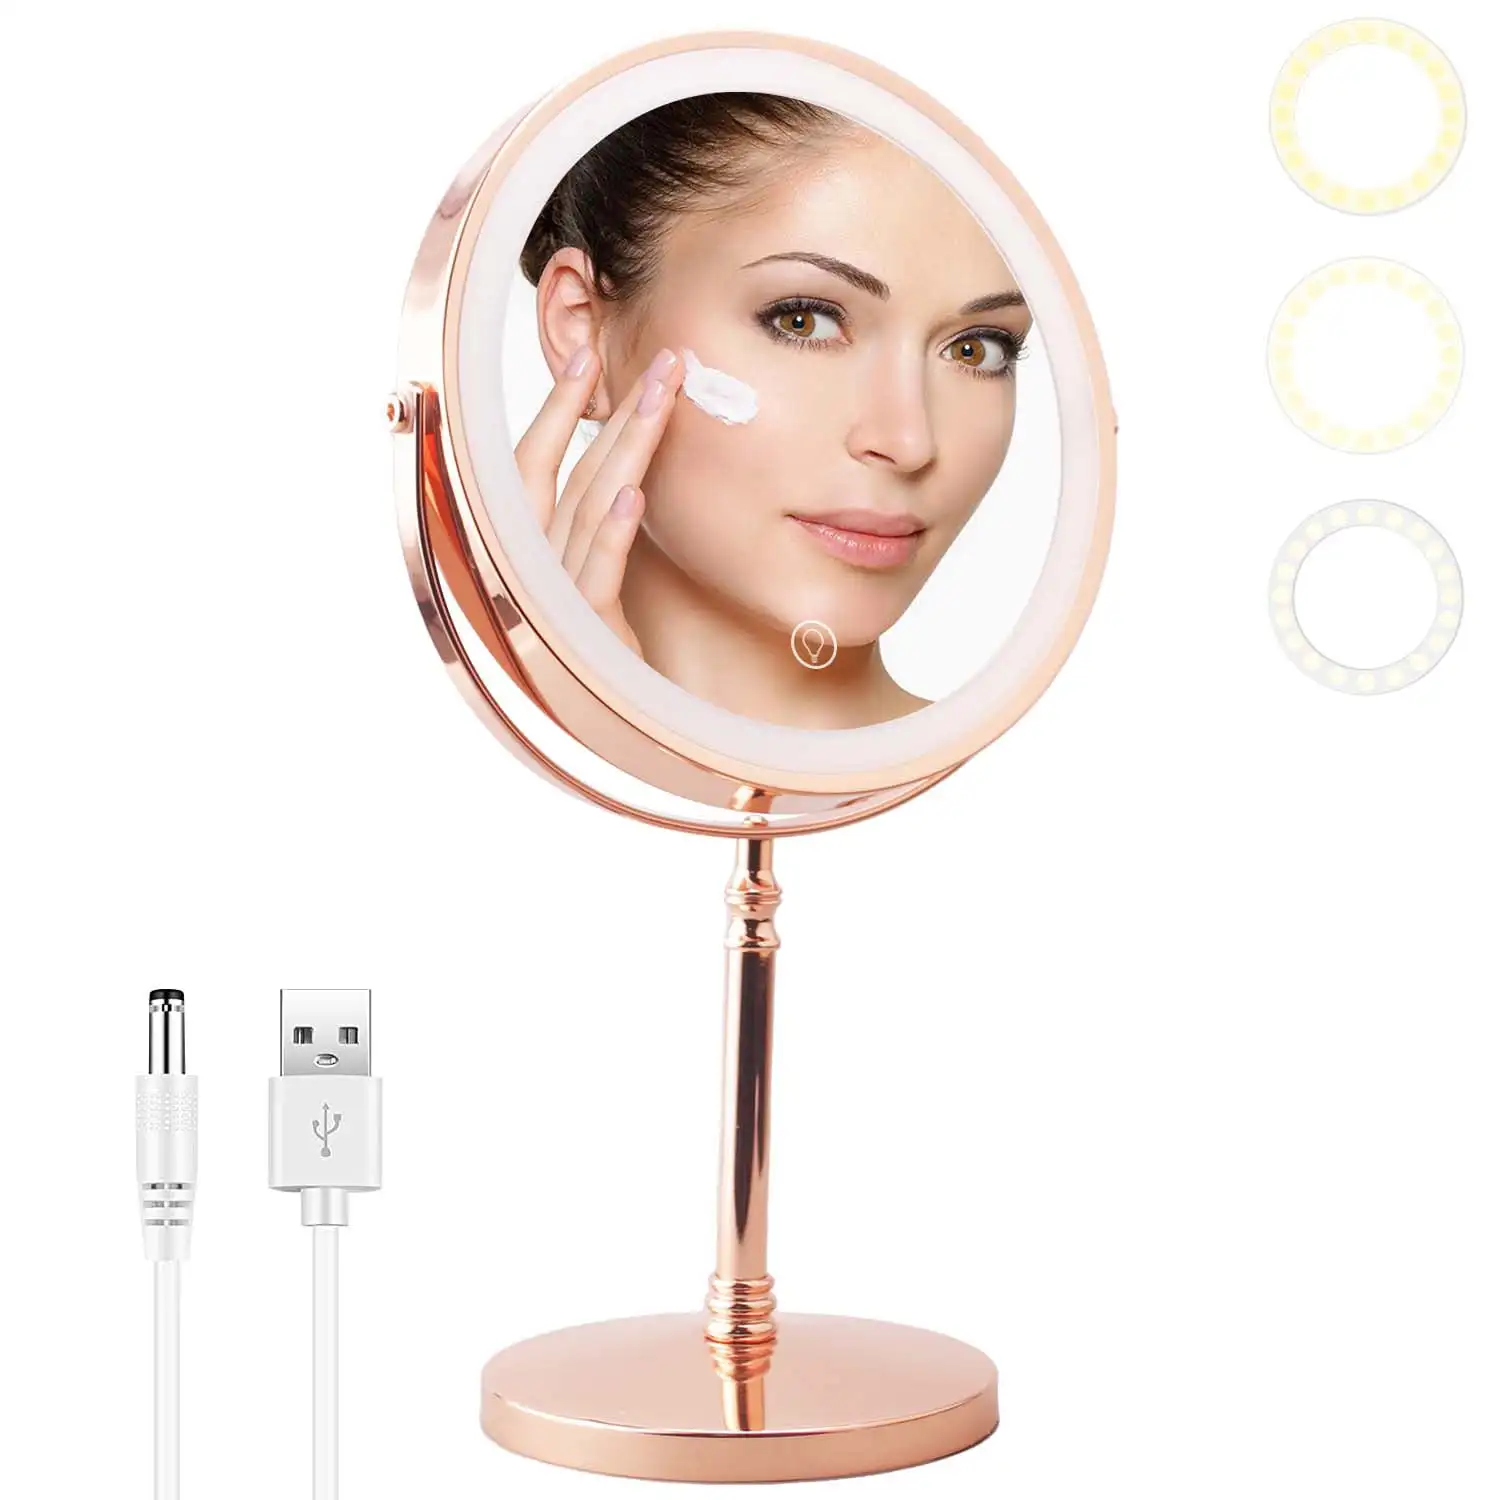 

8 Inch rechargeable Lighted Makeup Mirror with Magnification, Double Sided Vanity Mirror with 3 Color Soft LED Lights, 10x Magni